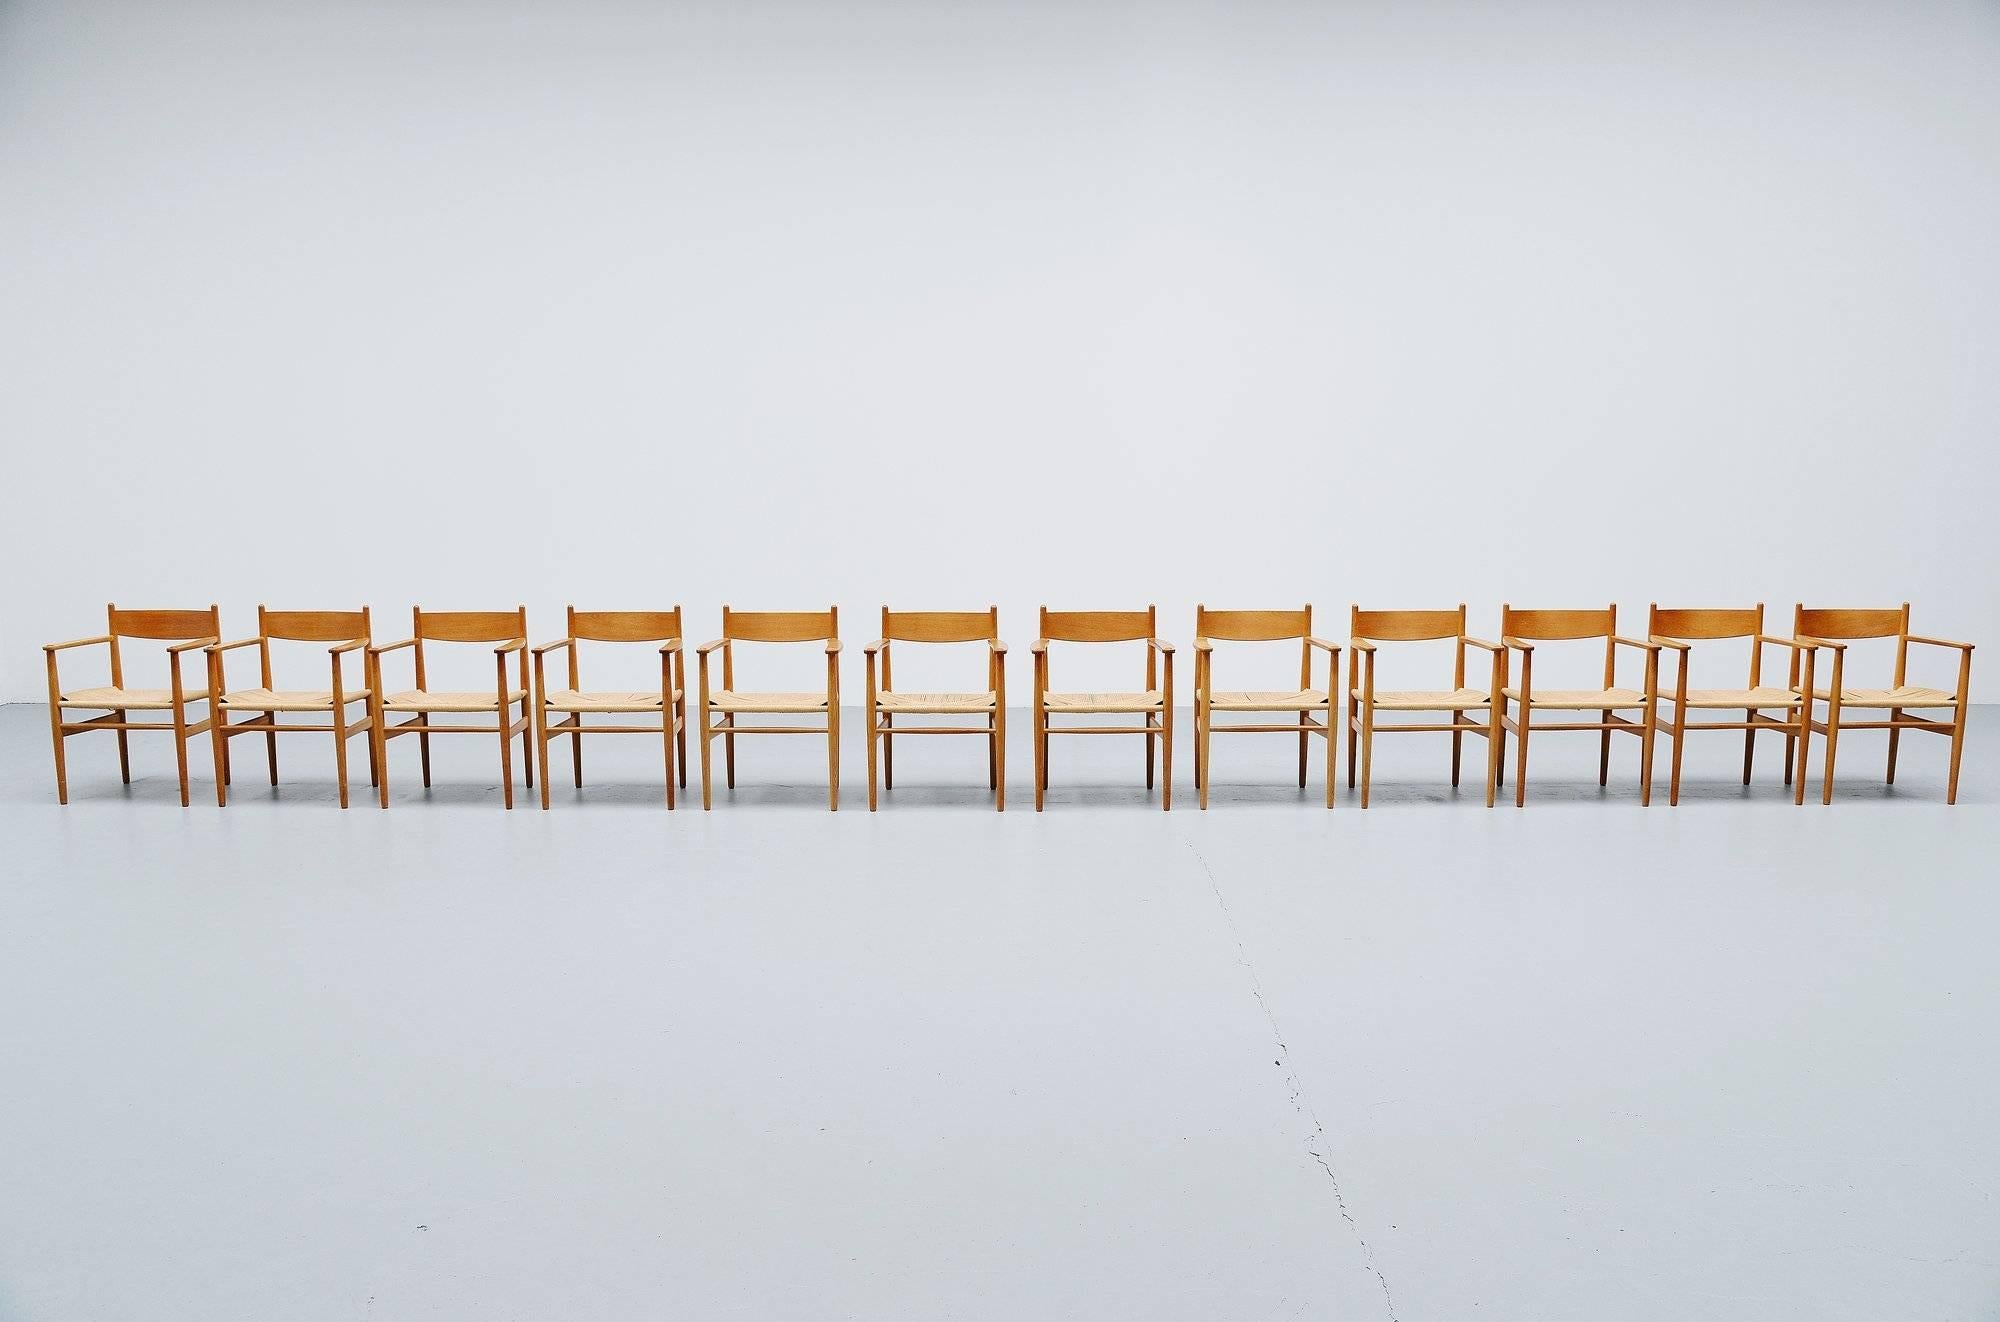 Extraordinary large set of CH37 armchairs designed by Hans J Wegner and manufactured by Carl Hansen, Denmark, 1962. The chairs have a solid oak wooden frame and papercord seats.Simple, functional and thoughtfully made, this 1962 Wegner design